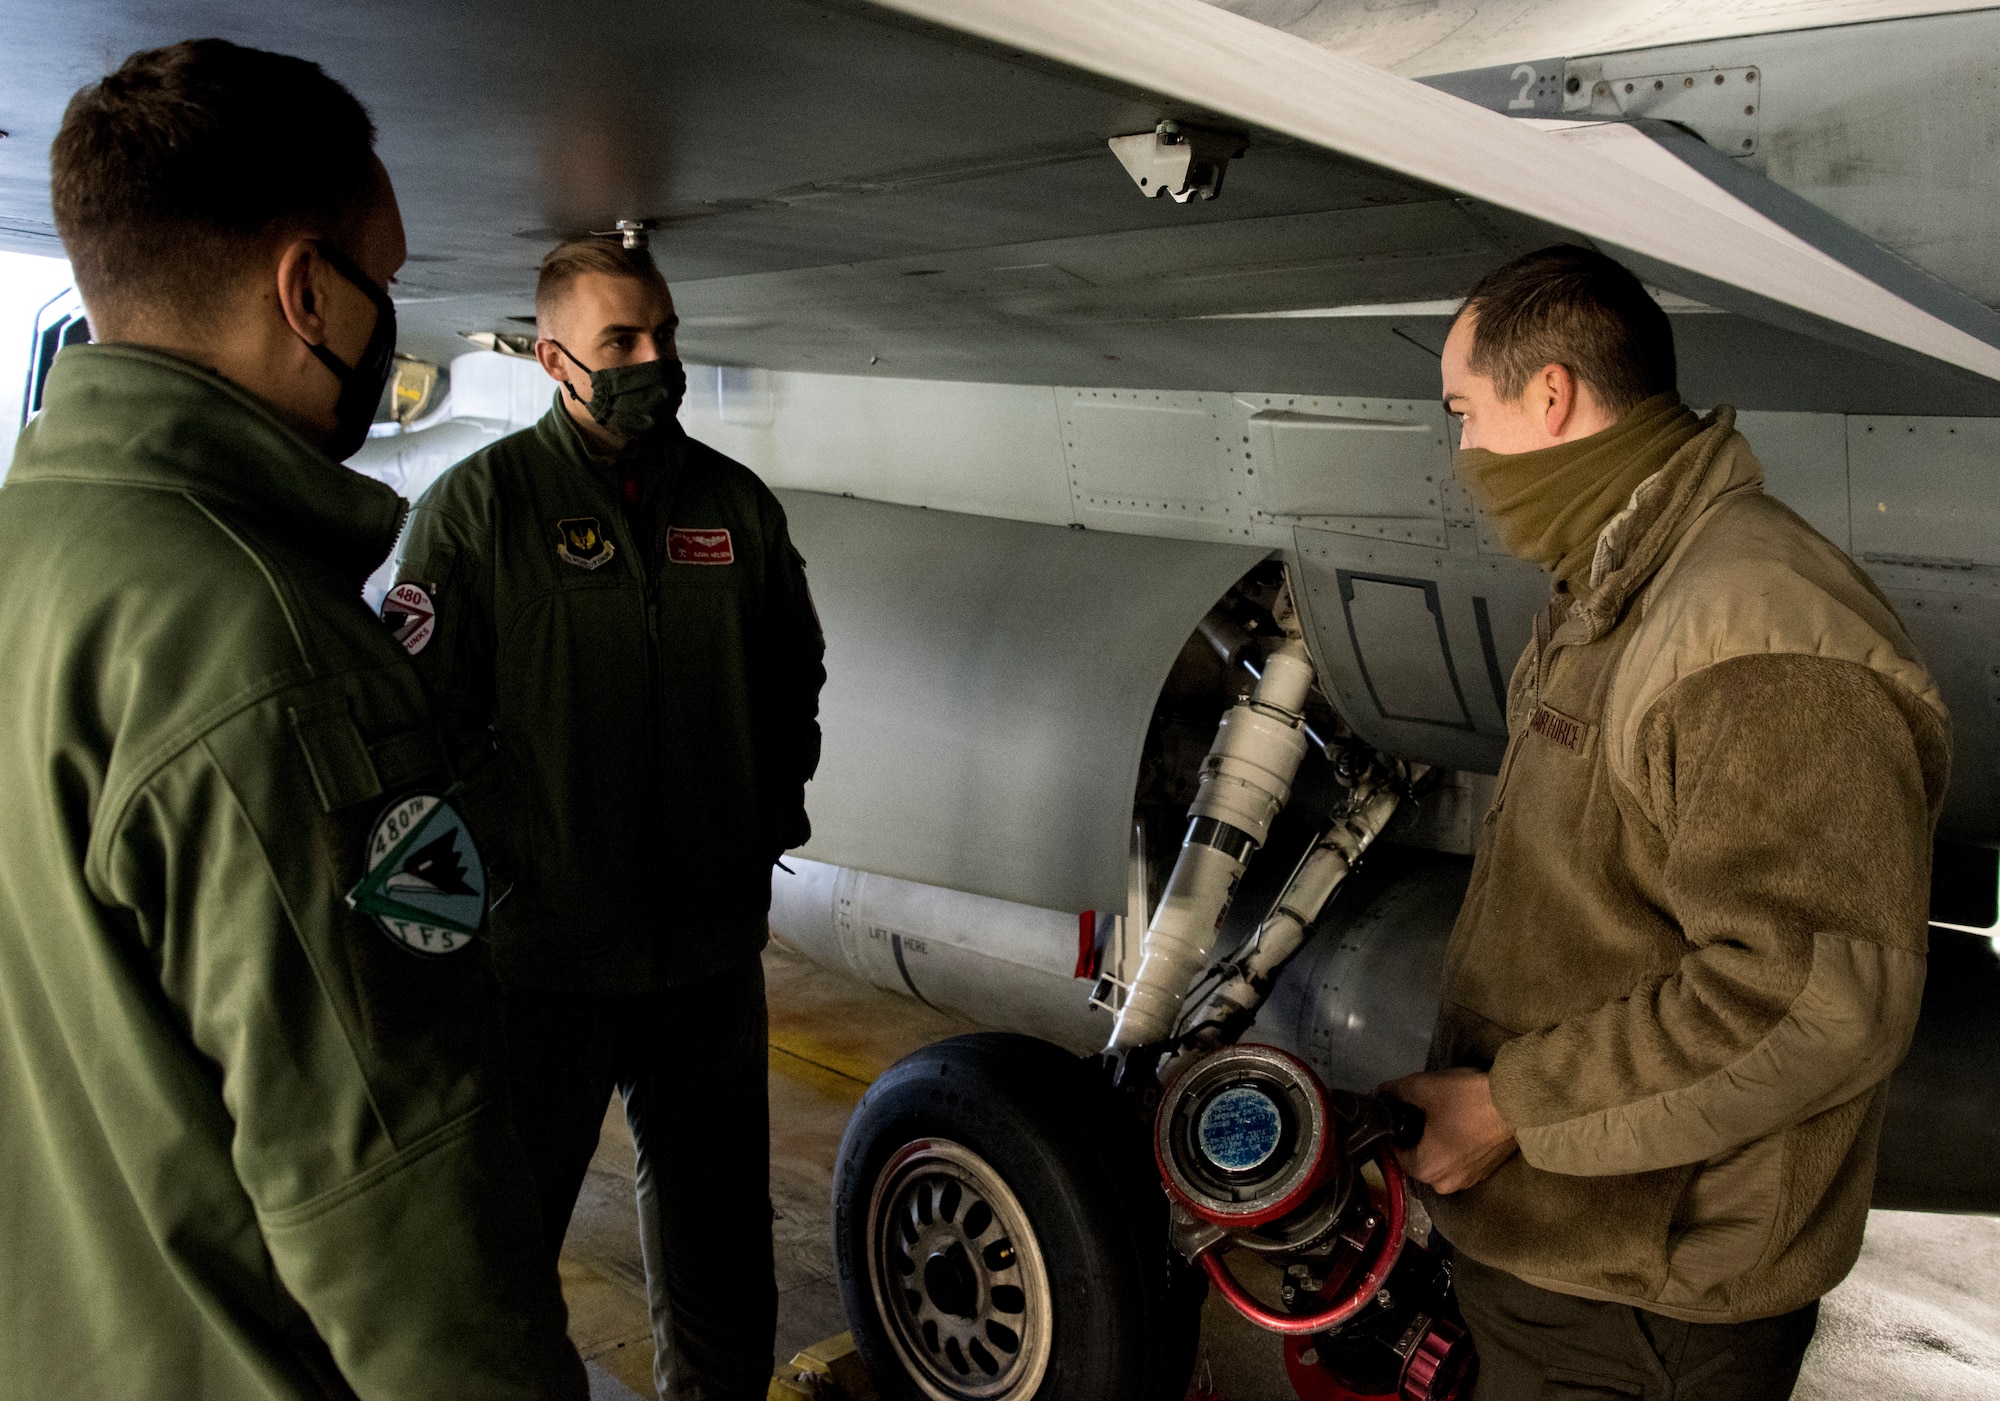 U.S. Air Force Senior Airman Ryan Versen, 52nd Aircraft Maintenance Squadron assistant dedicated crew chief, right, teaches pilots how to refuel an F-16 Fighting Falcon at
Spangdahlem Air Base, Germany, Dec. 11, 2020. The training provided experience for pilots to
refuel their own jet in a deployed environment. (U.S. Air Force photo by Senior Airman Chance D. Nardone)